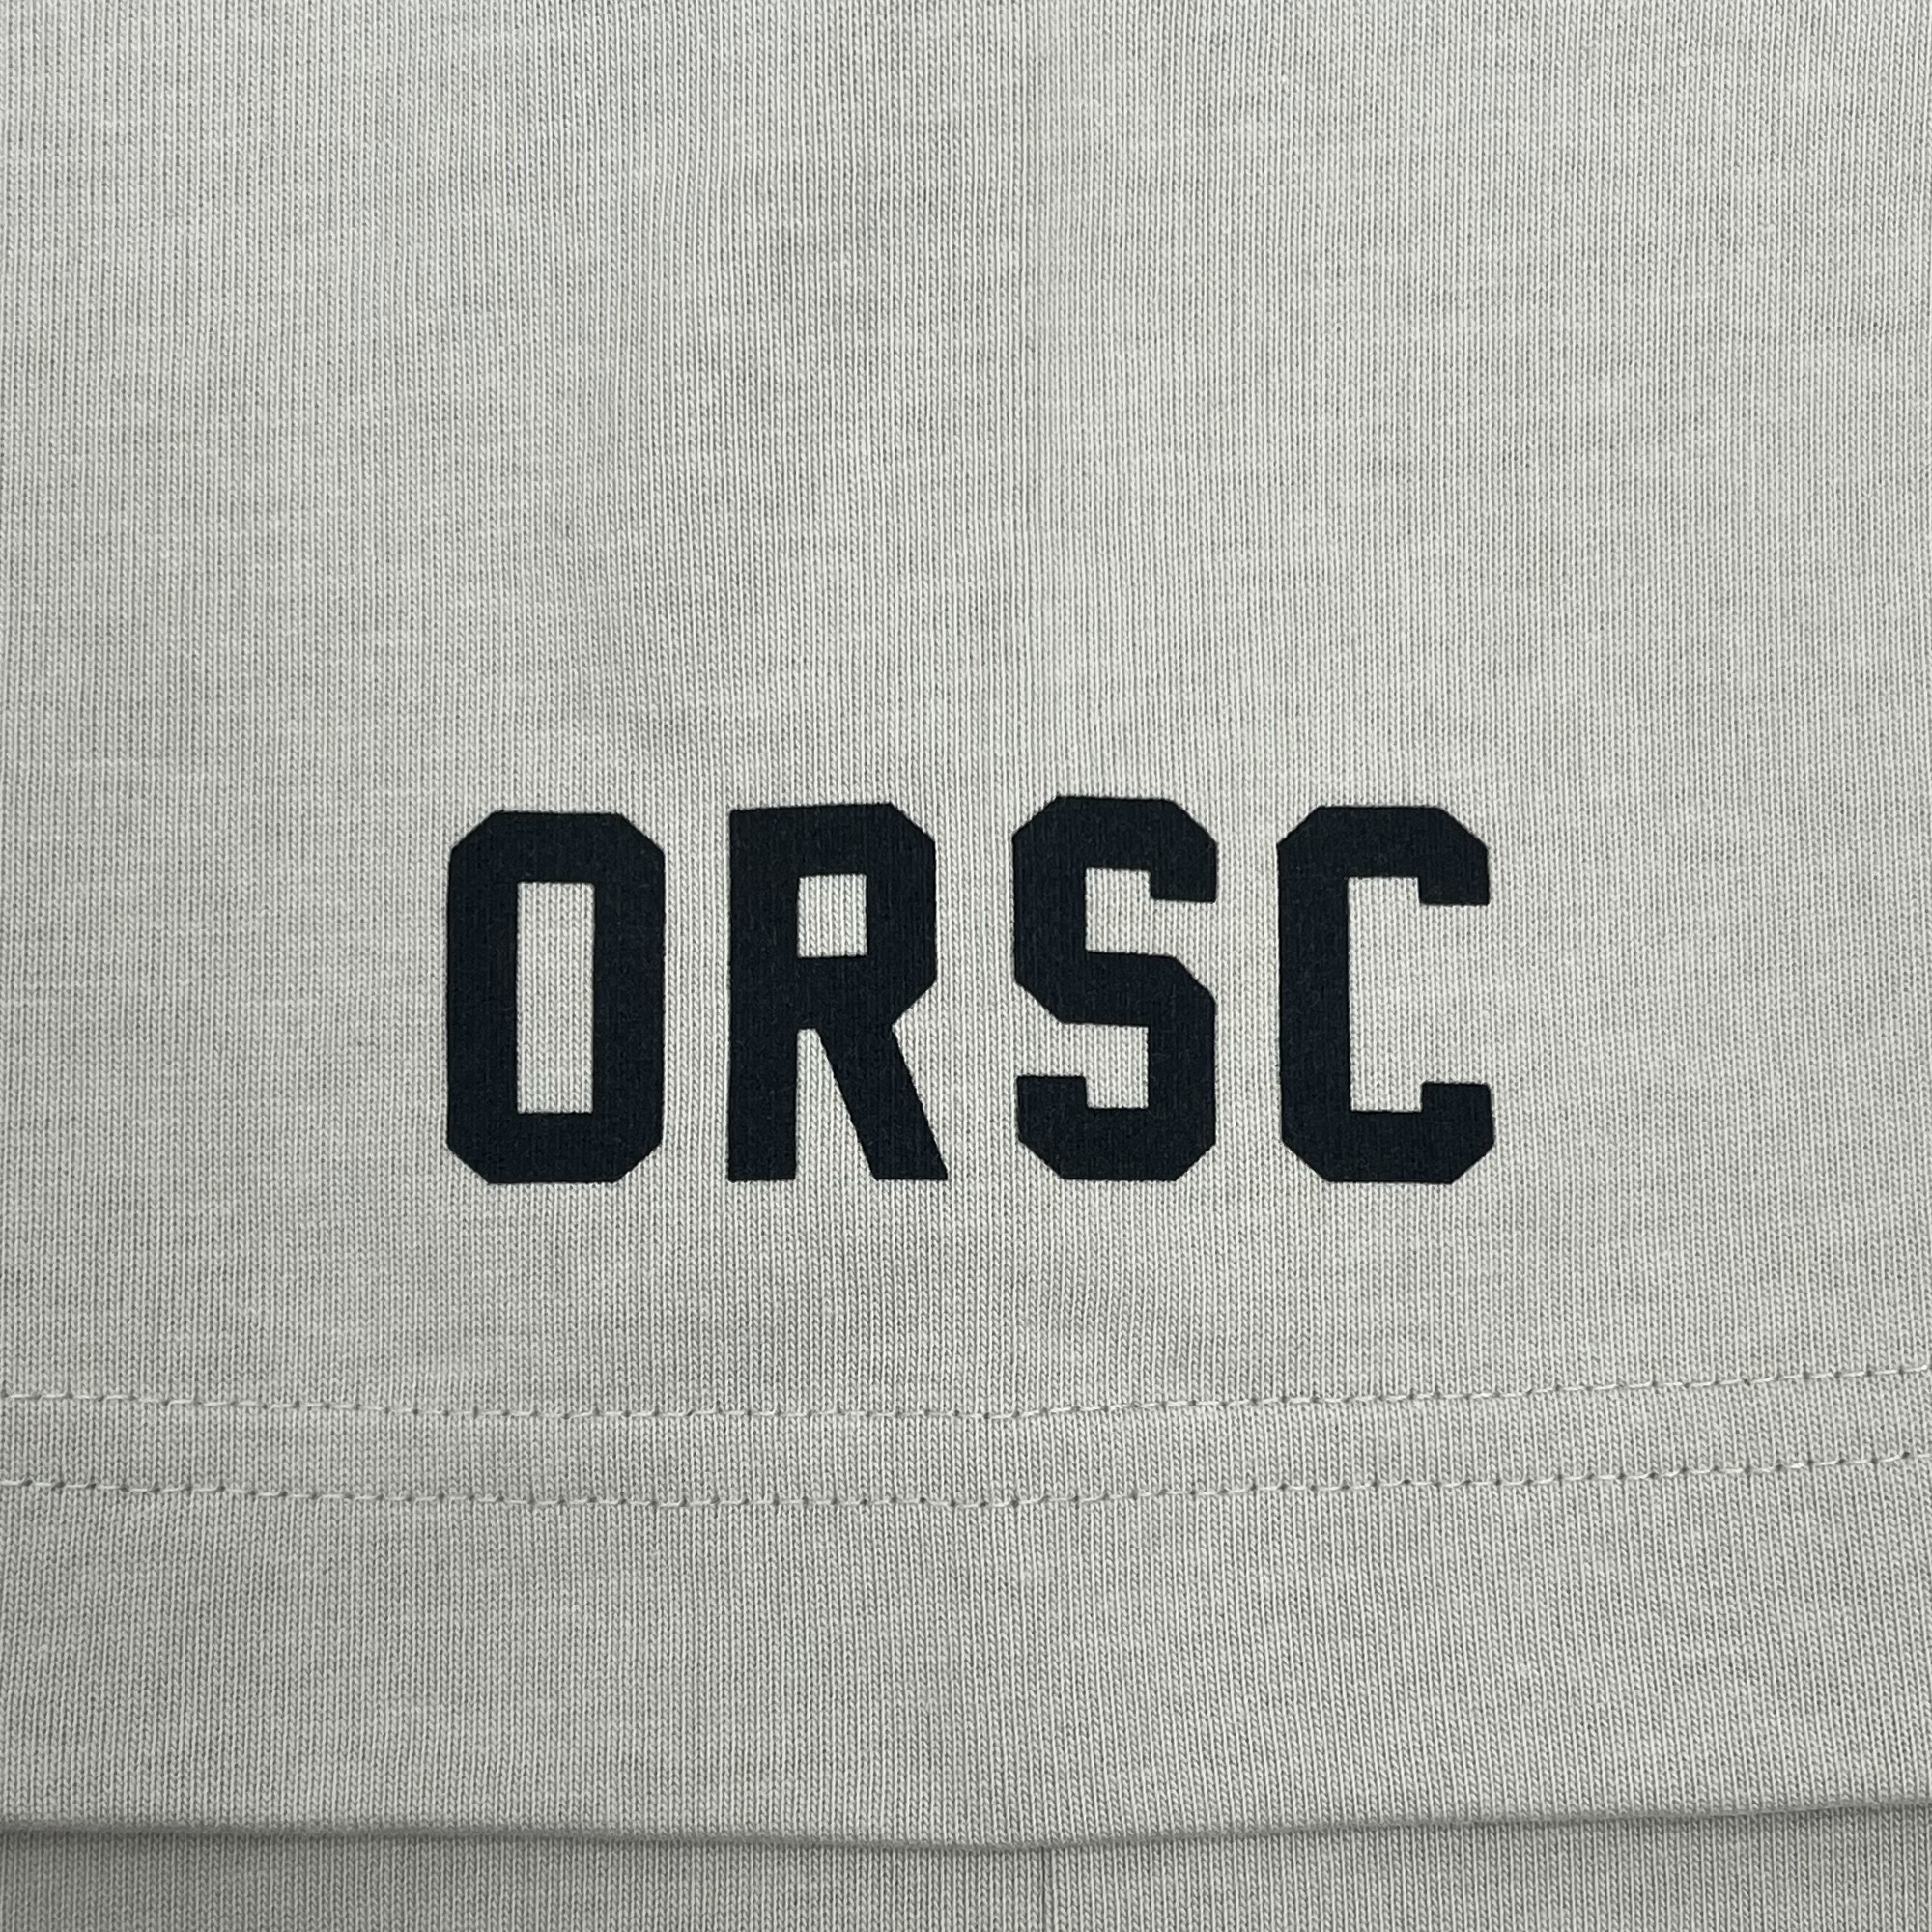 Detailed close-up of black ORSC wordmark on the sleeve of a bone-colored baseball jersey.